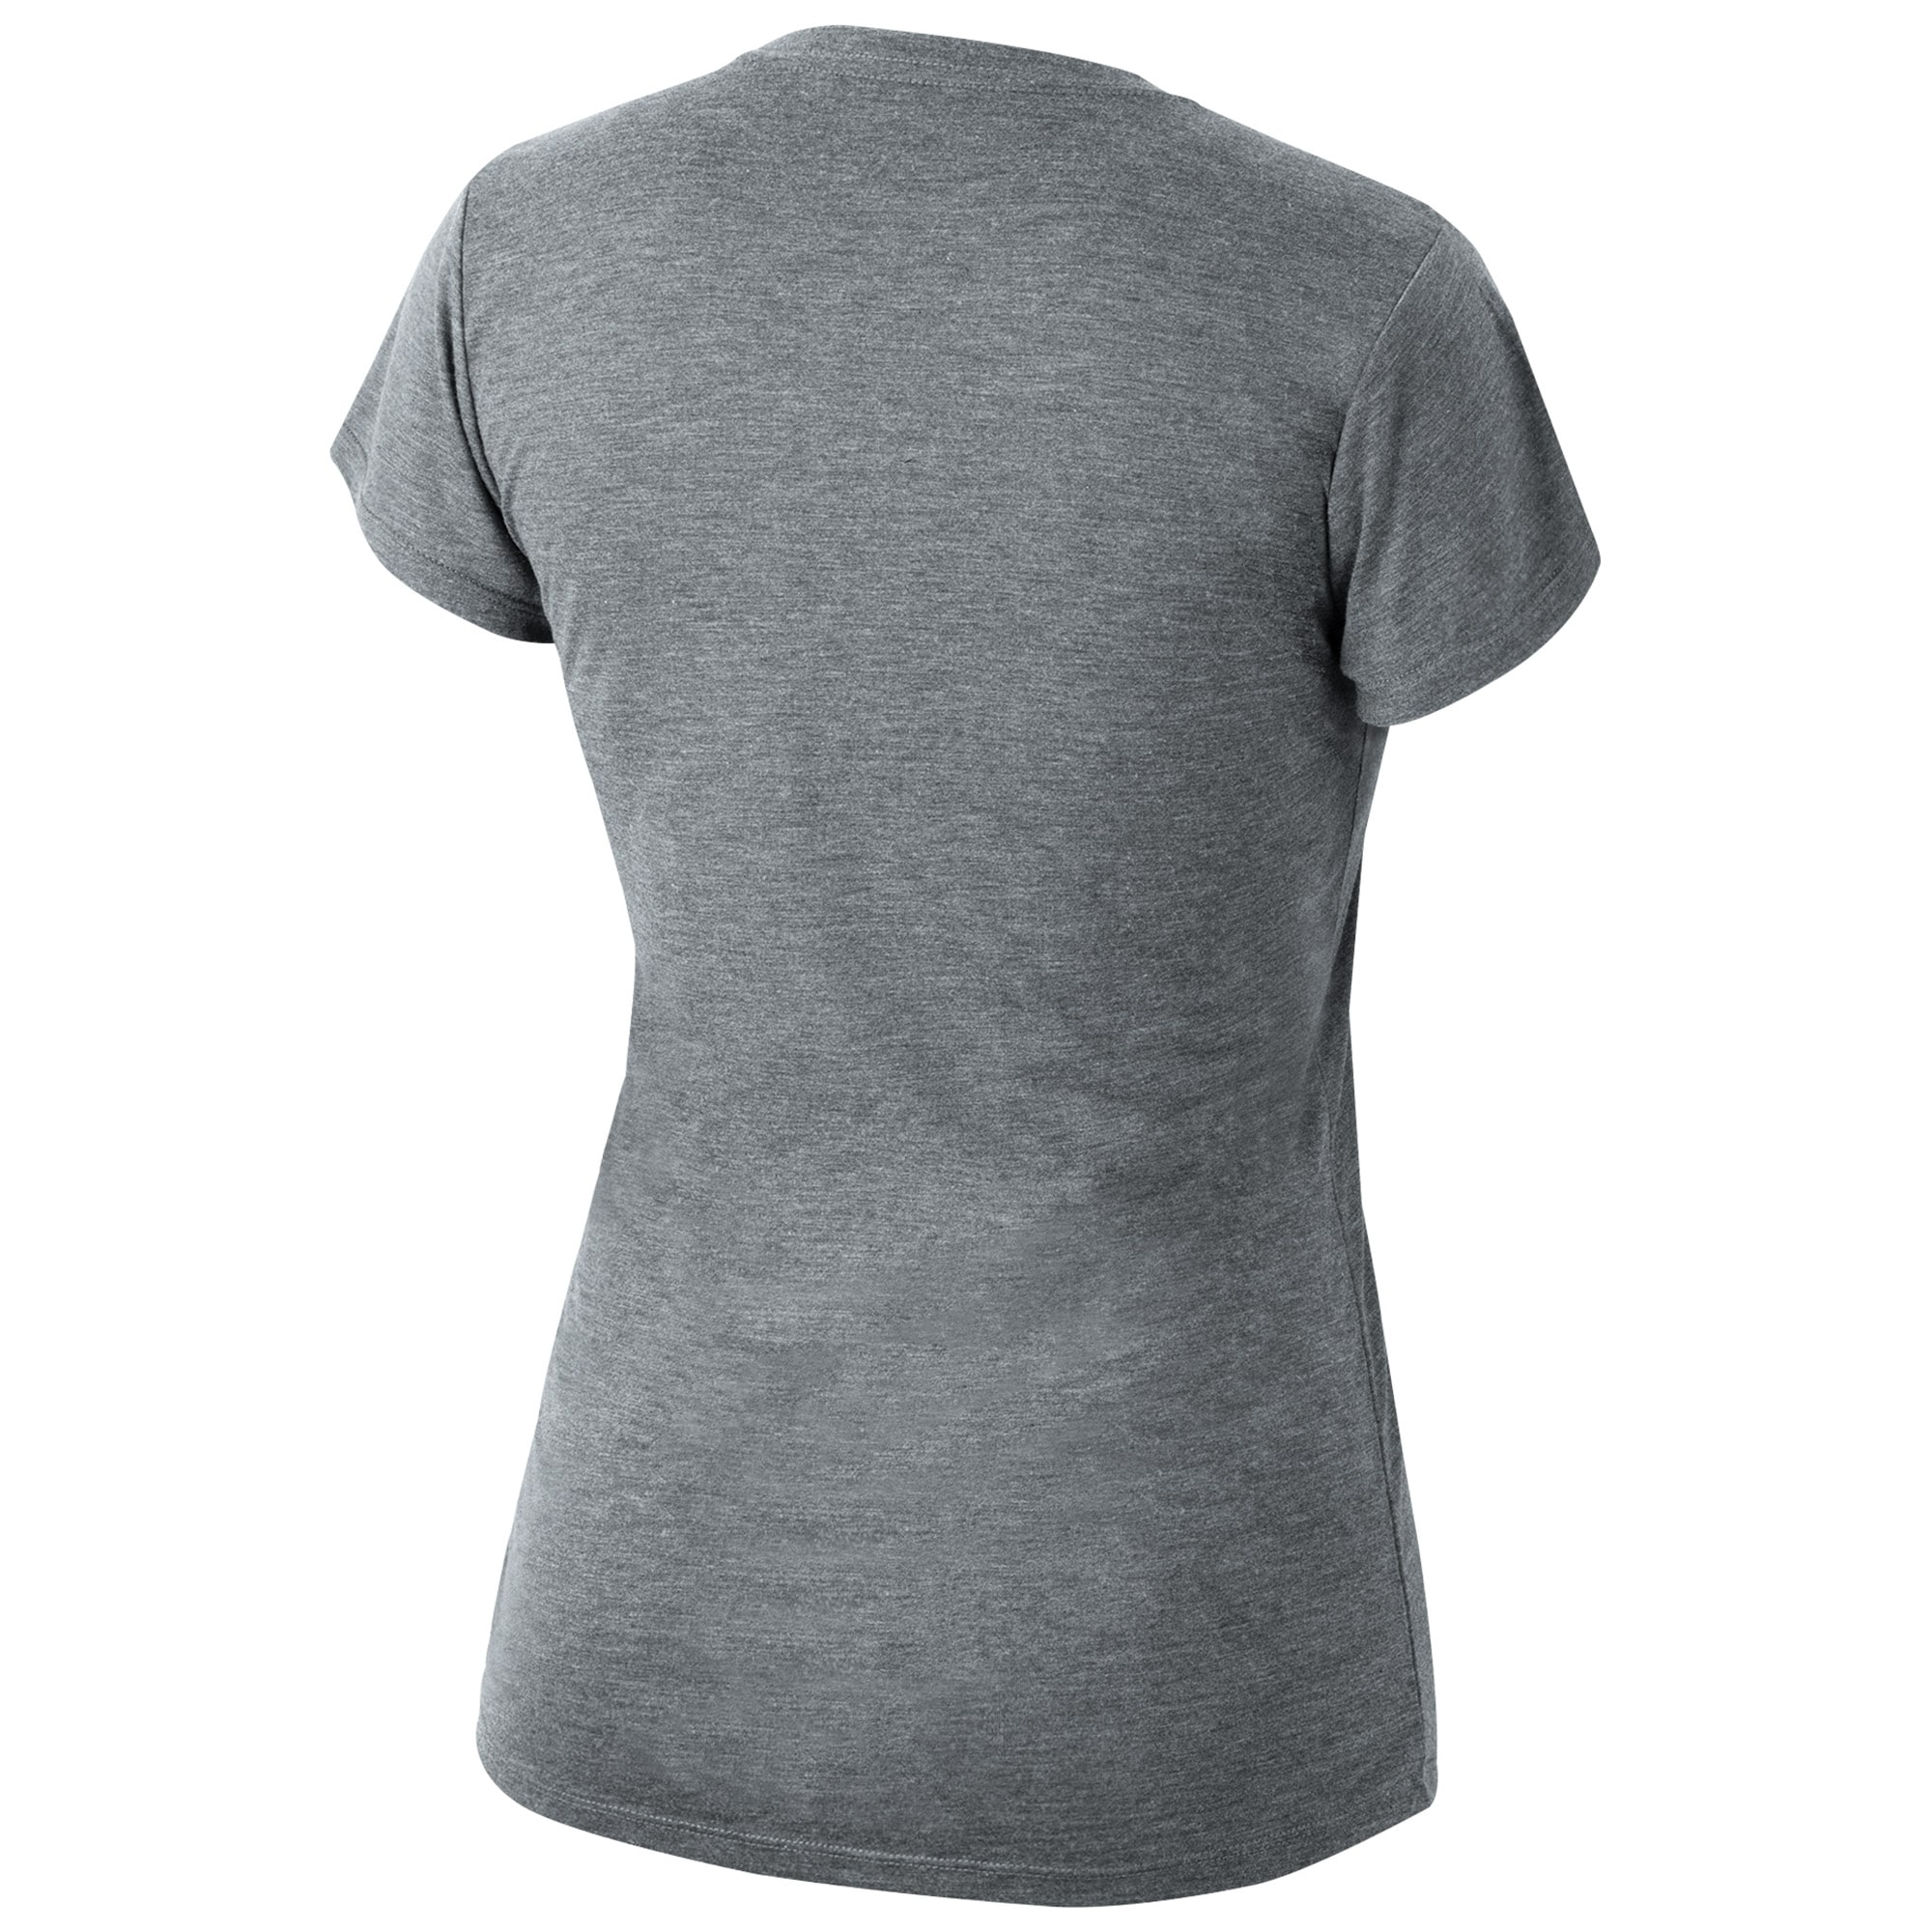 Women's Heathered Gray LSU Tigers Sideline Scoop Neck T-Shirt - image 3 of 3